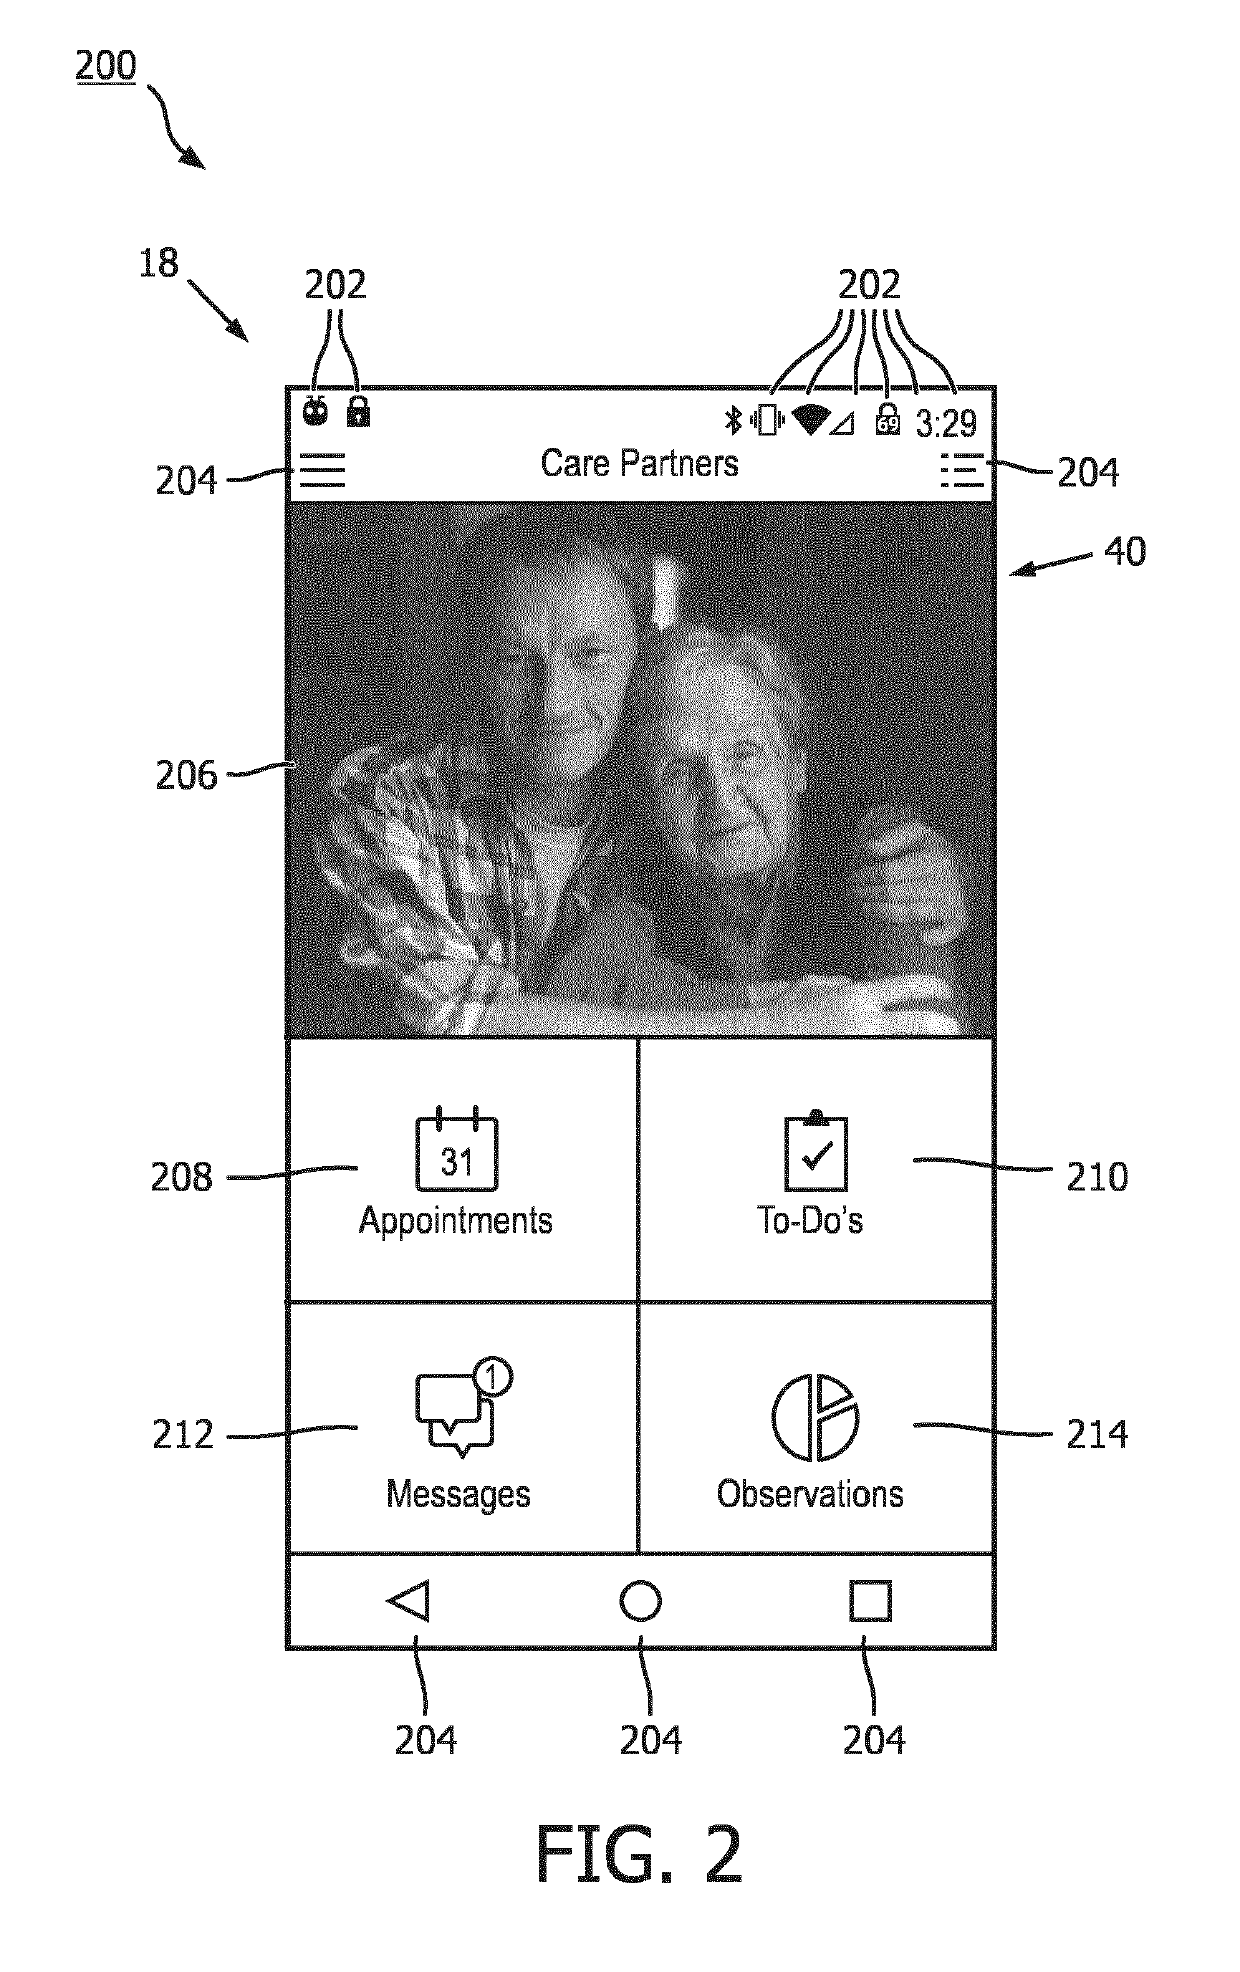 System and method for tracking informal observations about a care recipient by caregivers